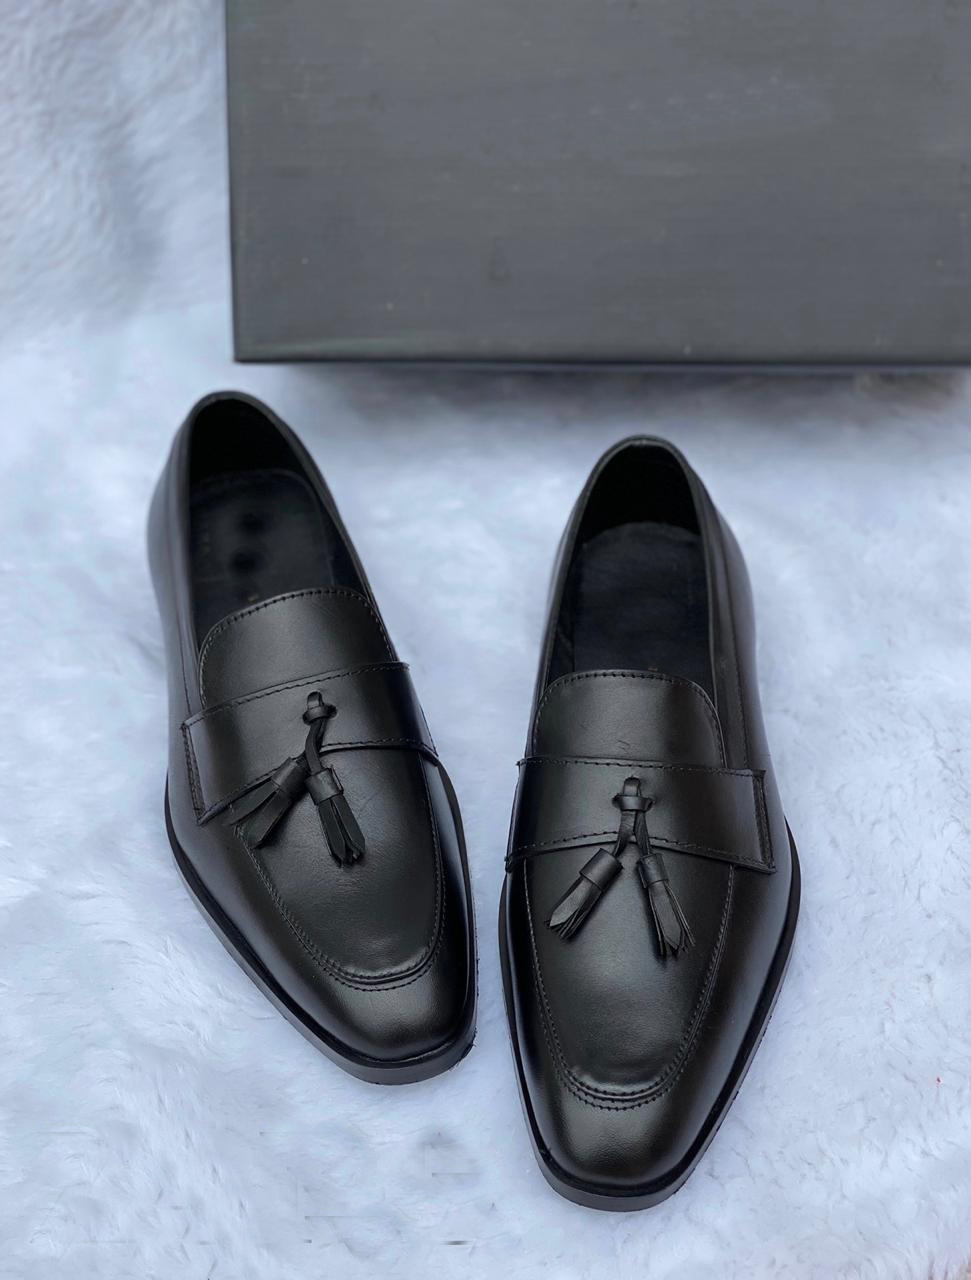 Leather Patent Slipons With Tassles For Men-Unique and Classy